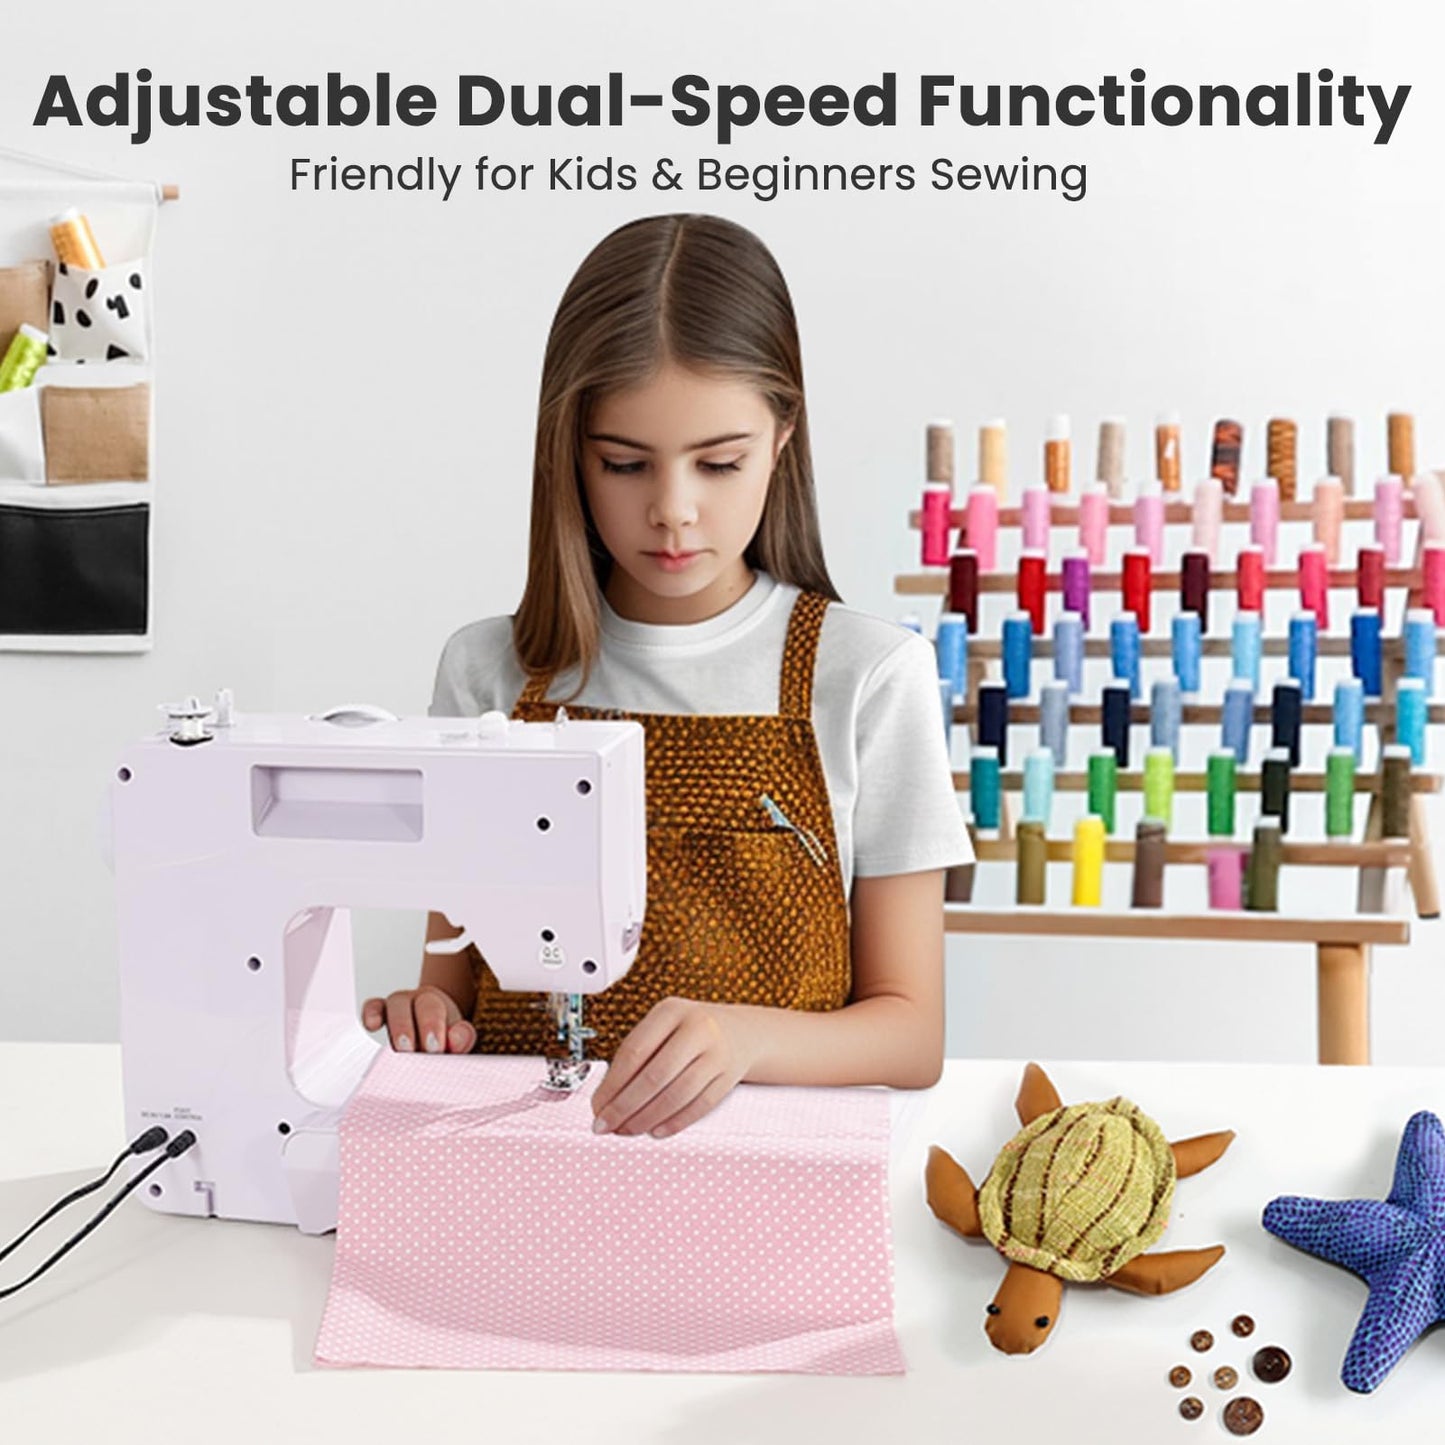 Caydo Sewing Machine for Beginners, Electric Mini Sewing Machine with 38 Stitches Dual Speed Kids Sewing Machine with Portable Sewing Storage Bag for Kids Aged 8-12 years